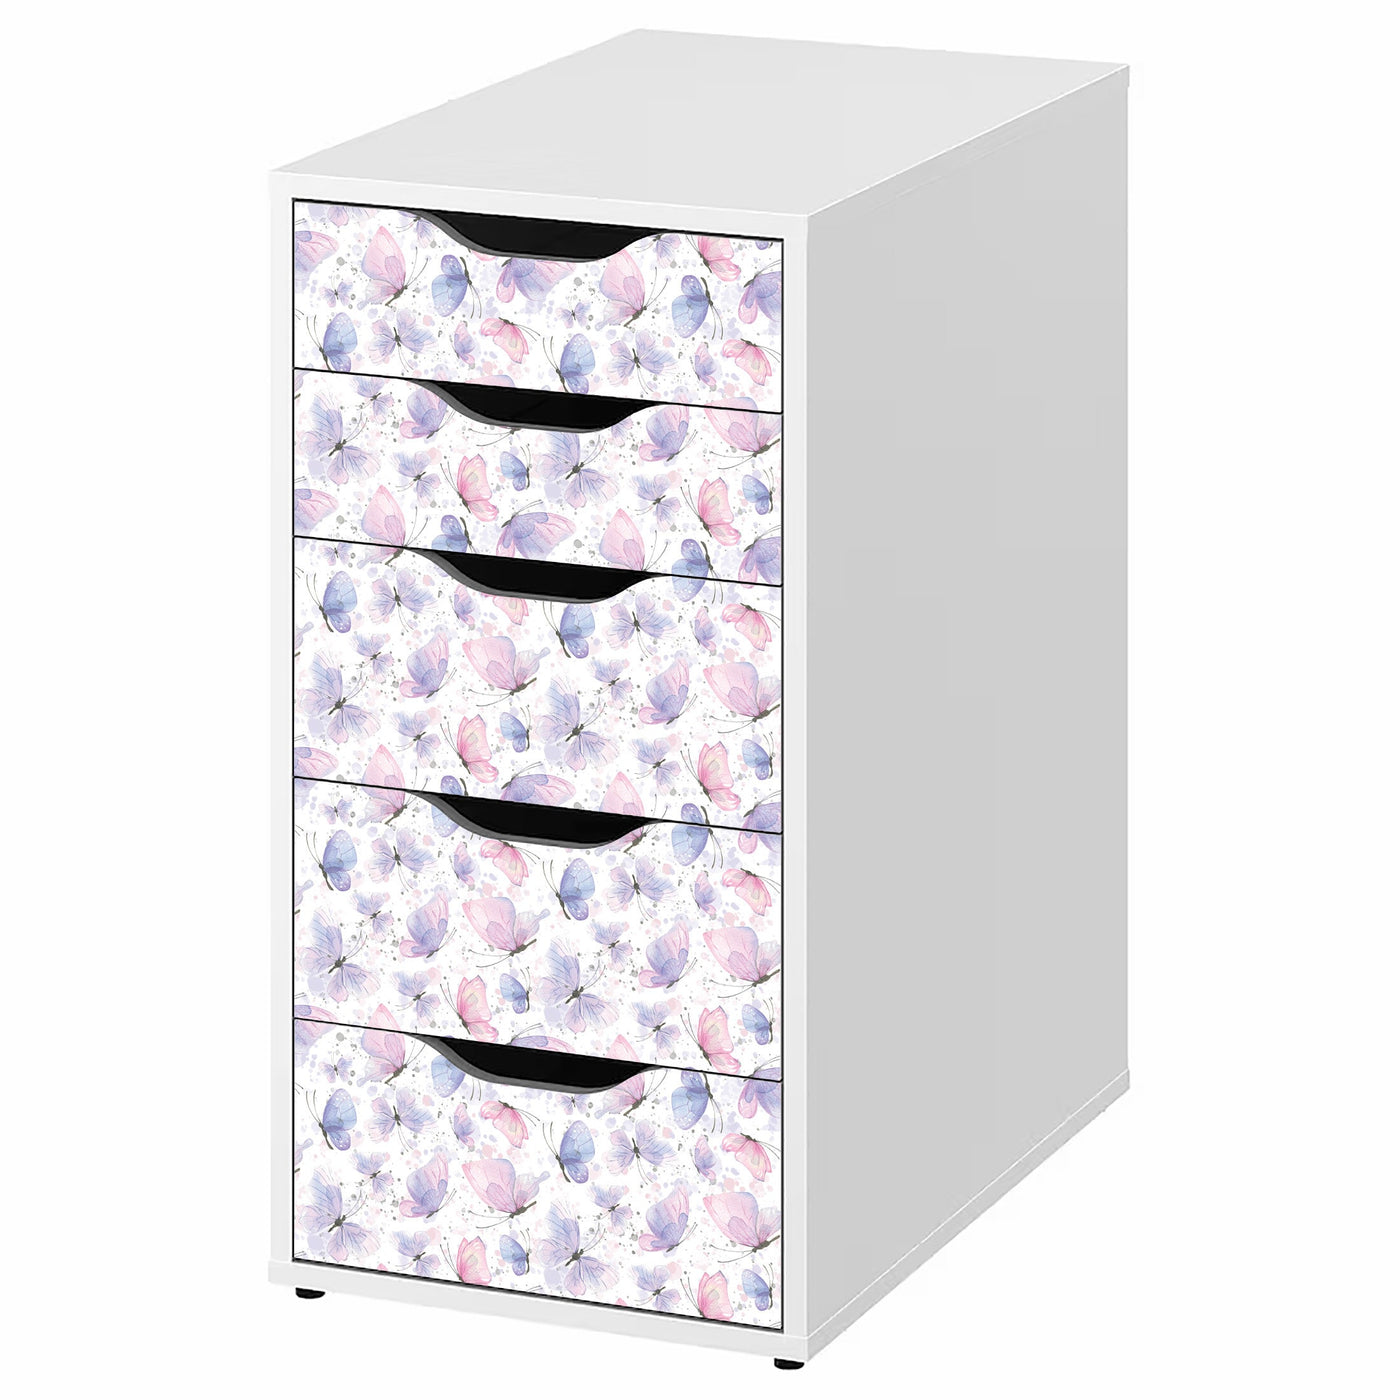 Butterfly decals for IKEA Alex 5 drawer unit (not included)